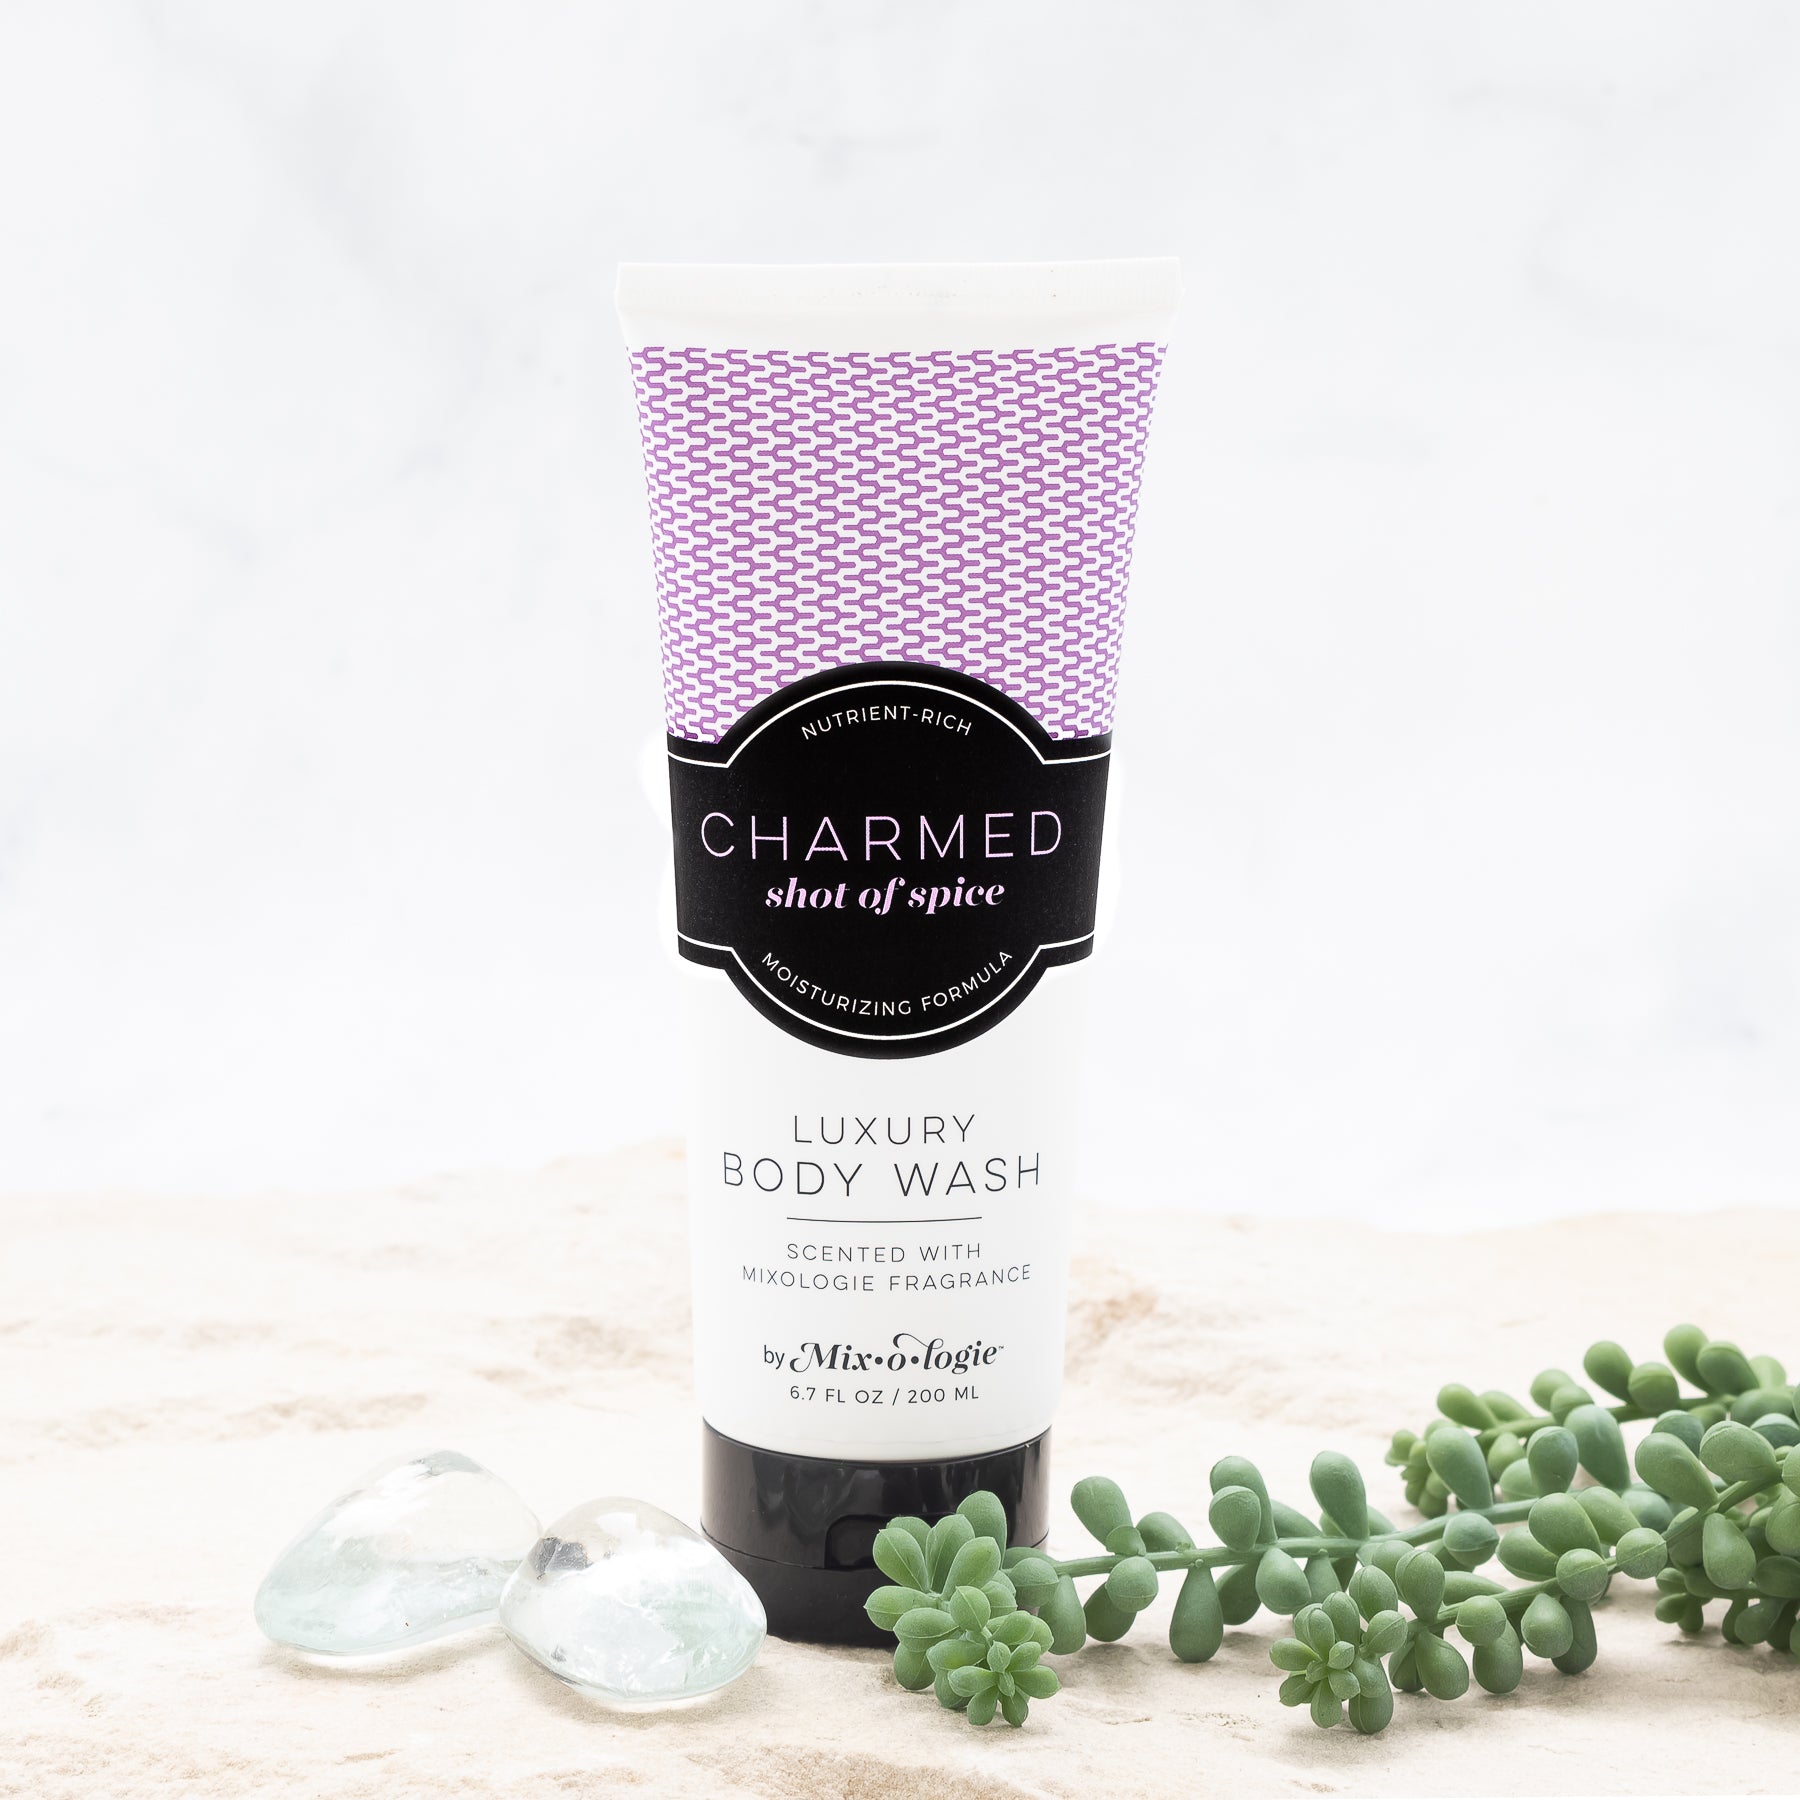 Luxury Body Wash in Mixologie’s Chamred (Shot of Spice) in purple color sample package with black label. Contains 6.7 fl oz or 200 mL pictured on a white background. 